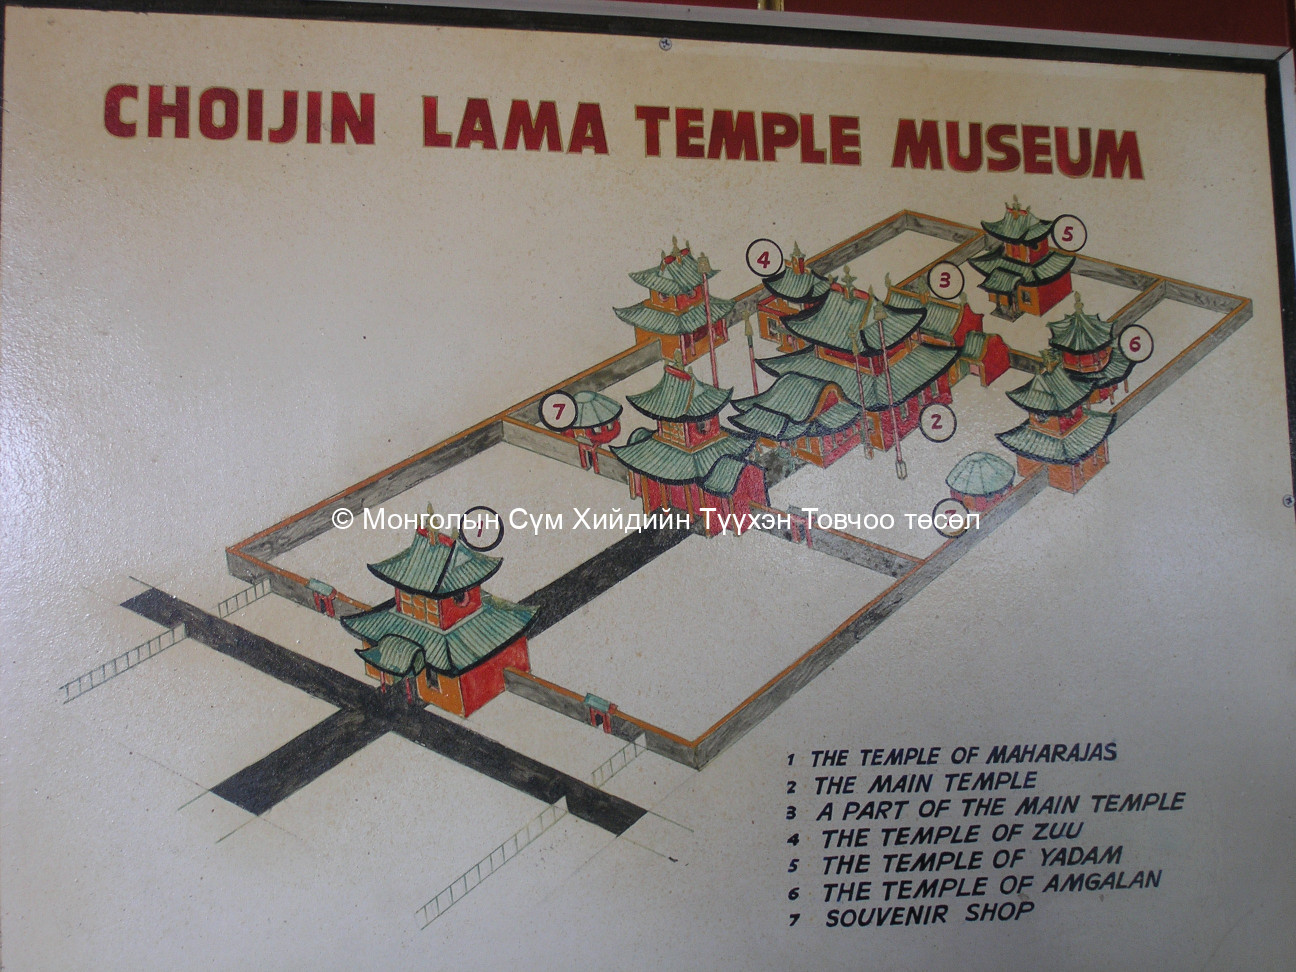 Board showing the arrangement of the temple buildi